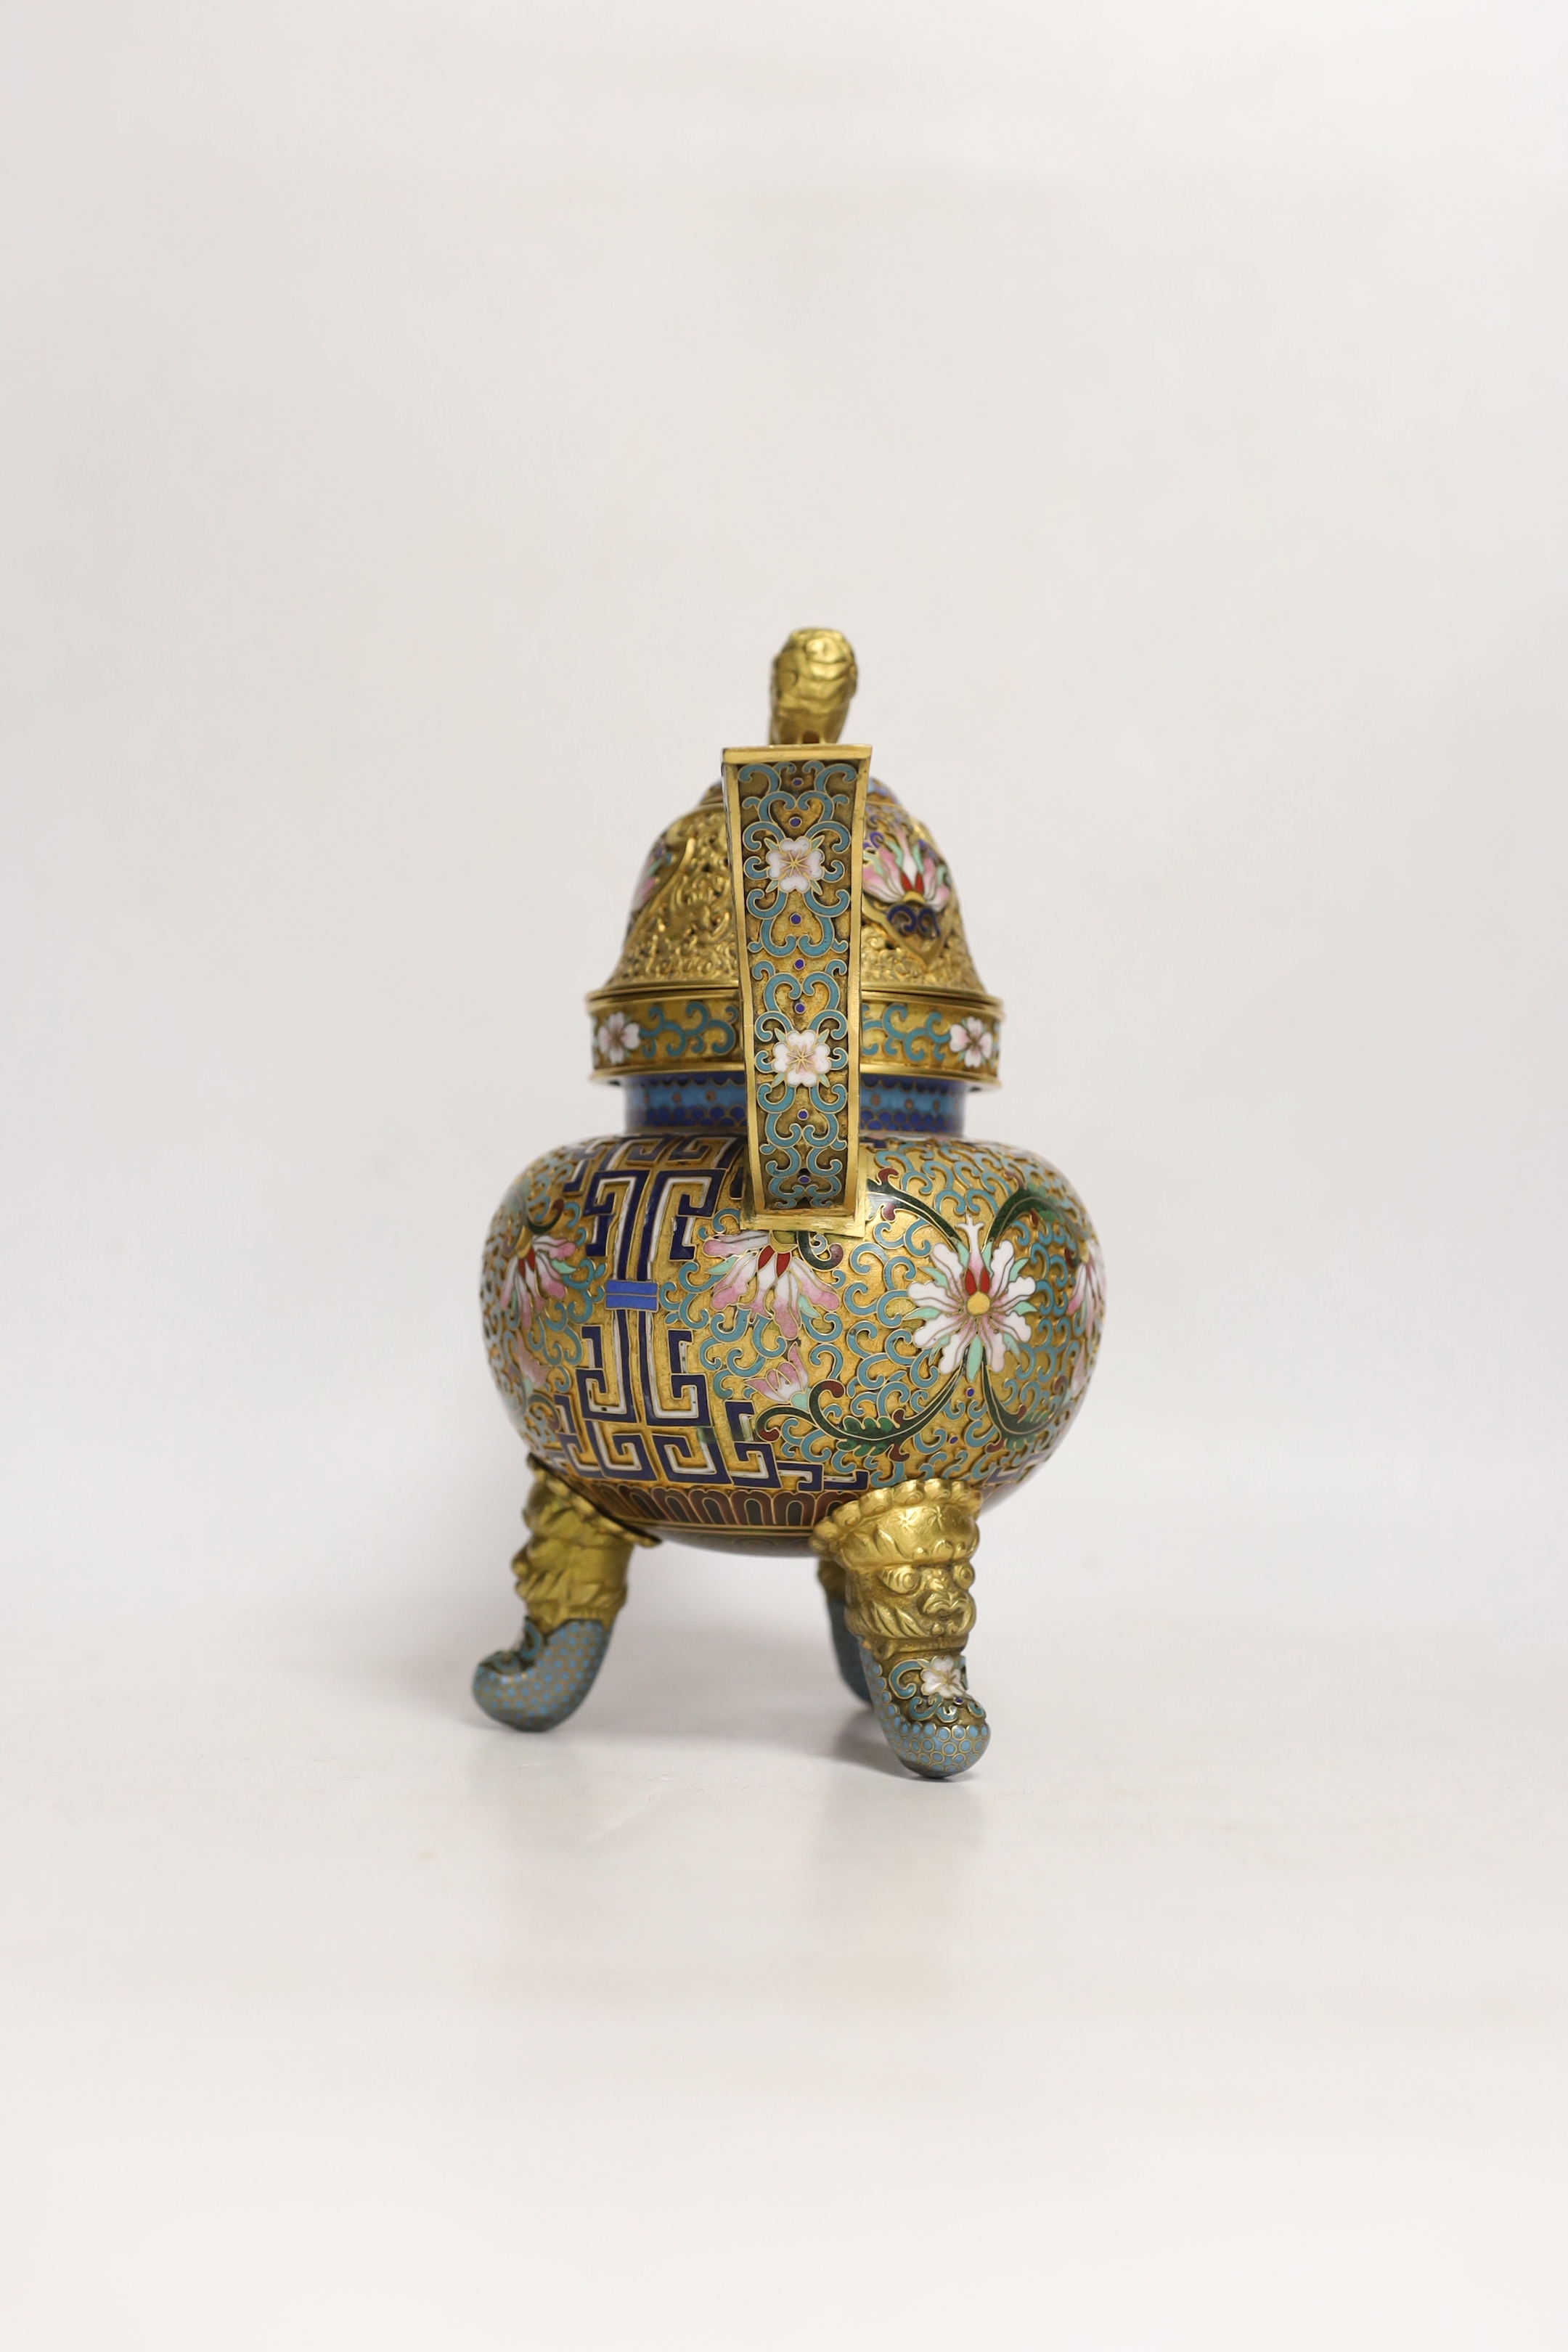 A Chinese cloisonné enamel tripod censer and cover, 22cm high including cover - Image 2 of 5